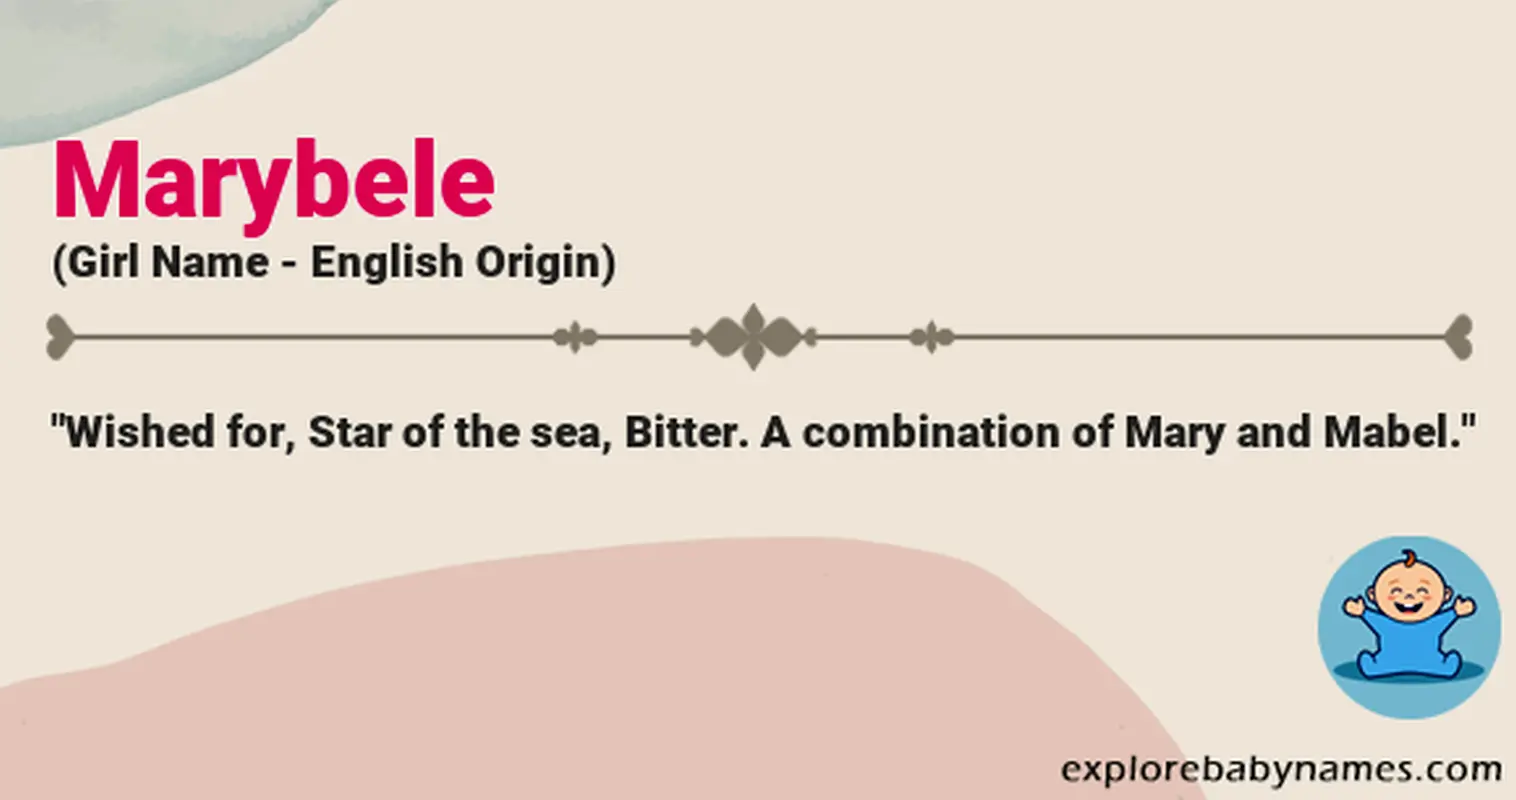 Meaning of Marybele